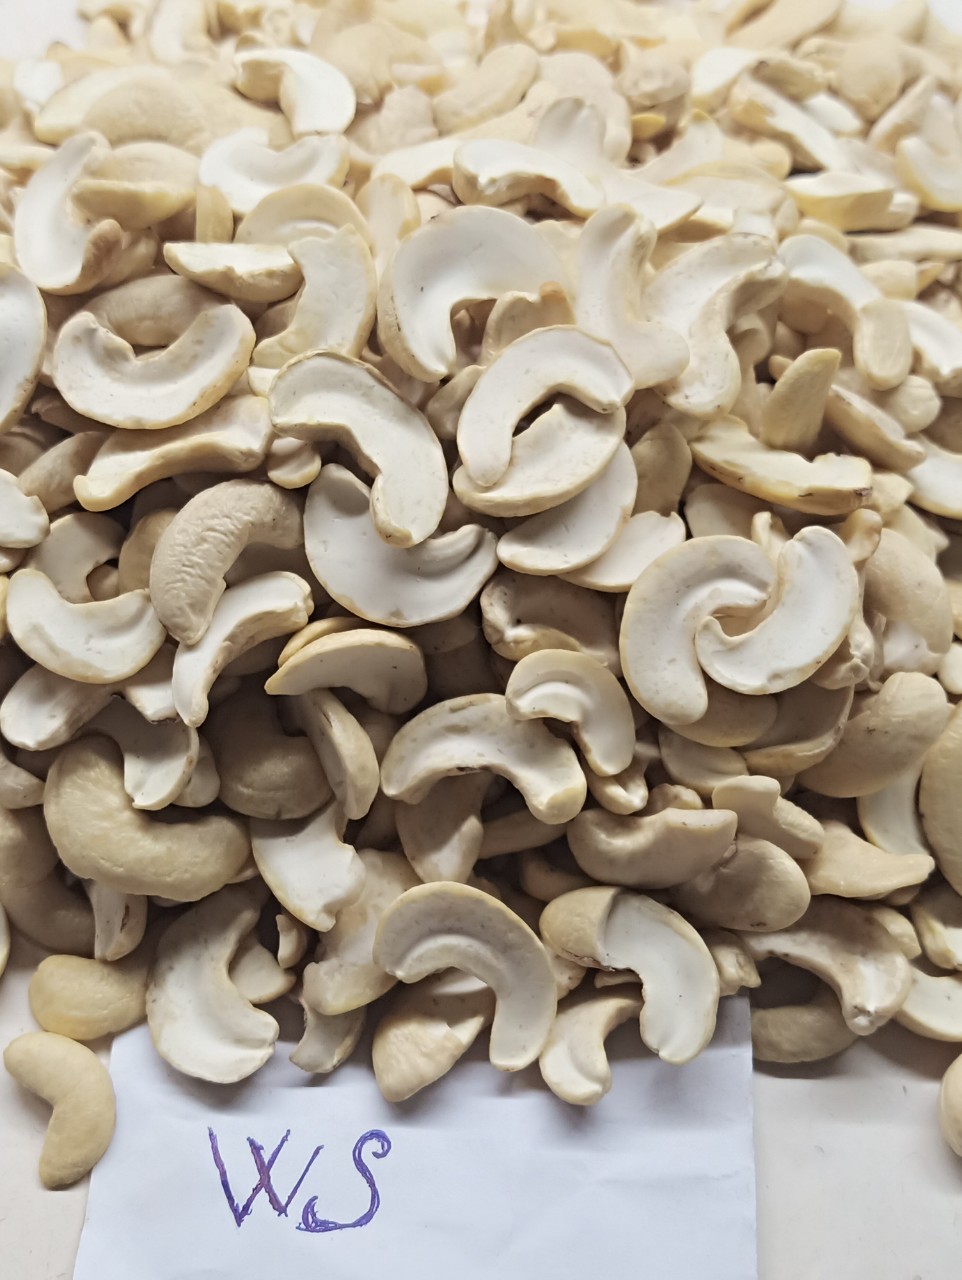 Raw Image Of WS Cashew Nuts From Our Cashew Factory In Binh Phuoc, Vietnam – 1 W320 image!